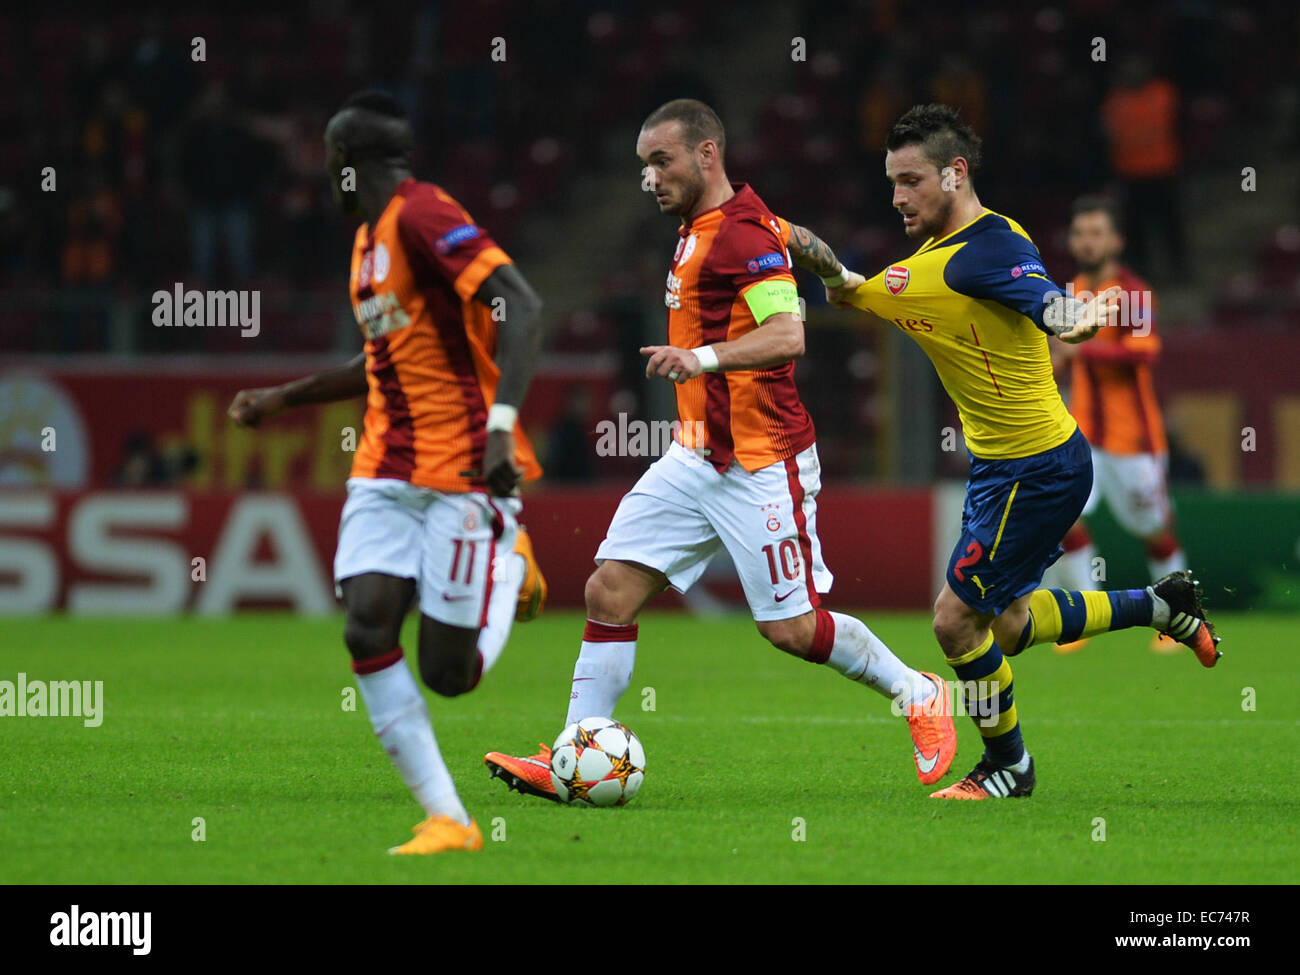 Istanbul, Turkey. 9th Dec, 2014. Galatasaray's Wesley Sneijder (2nd L) pulls the jersey of Arsenal's Mathieu Debuchy (1st R) during the UEFA Champions League group D football match at Ali Sami Yen Stadium in Istanbul, Turkey, on Dec. 9, 2014. Arsenal won 4-1. © Lu Zhe/Xinhua/Alamy Live News Stock Photo